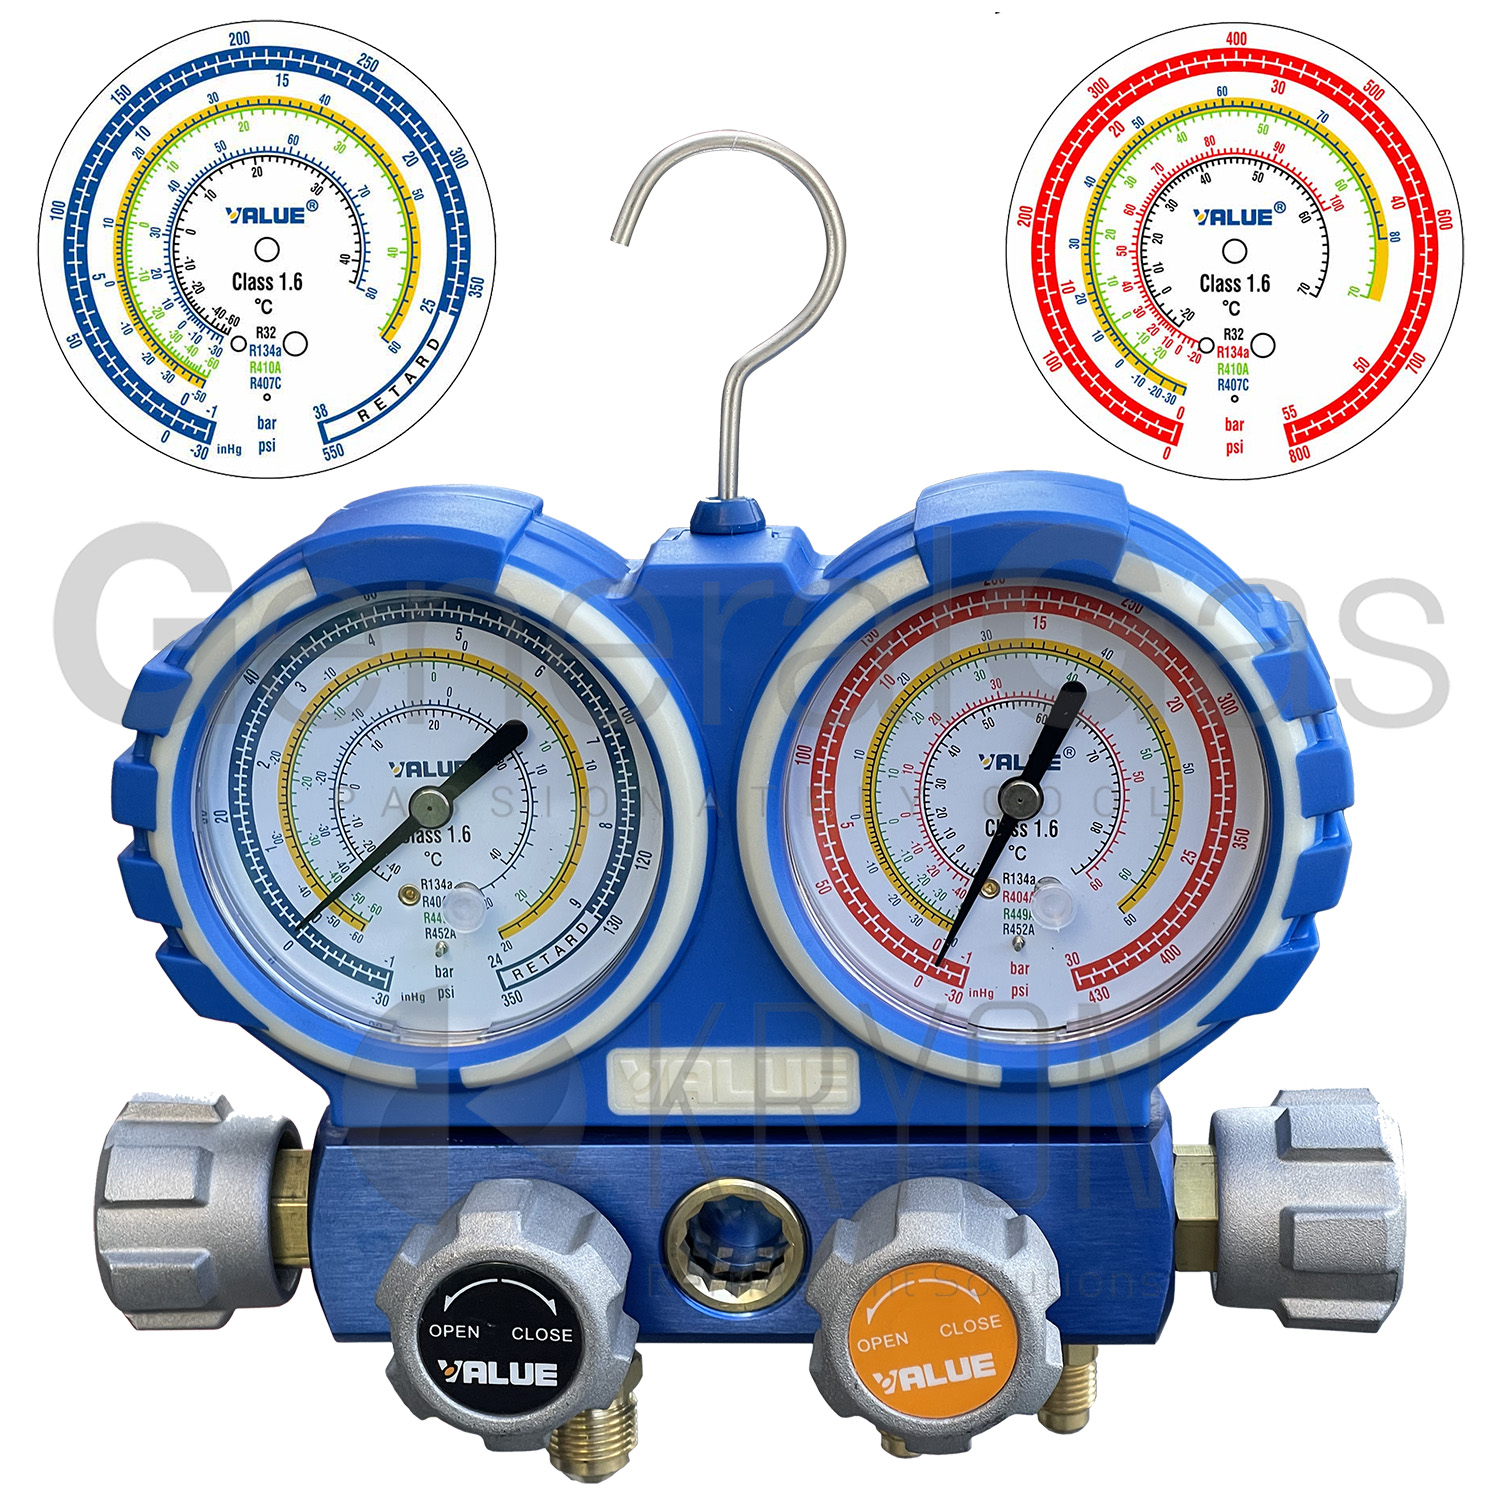 VALUE VMG-4-R32-03 Manifold Gauge (analogic) - 4 ways - gauges dia. 80 mm. - residential A/C (R32, R410A, R407C, R134a) in blow case - declaration of conformity with serial number of the instrument supplied